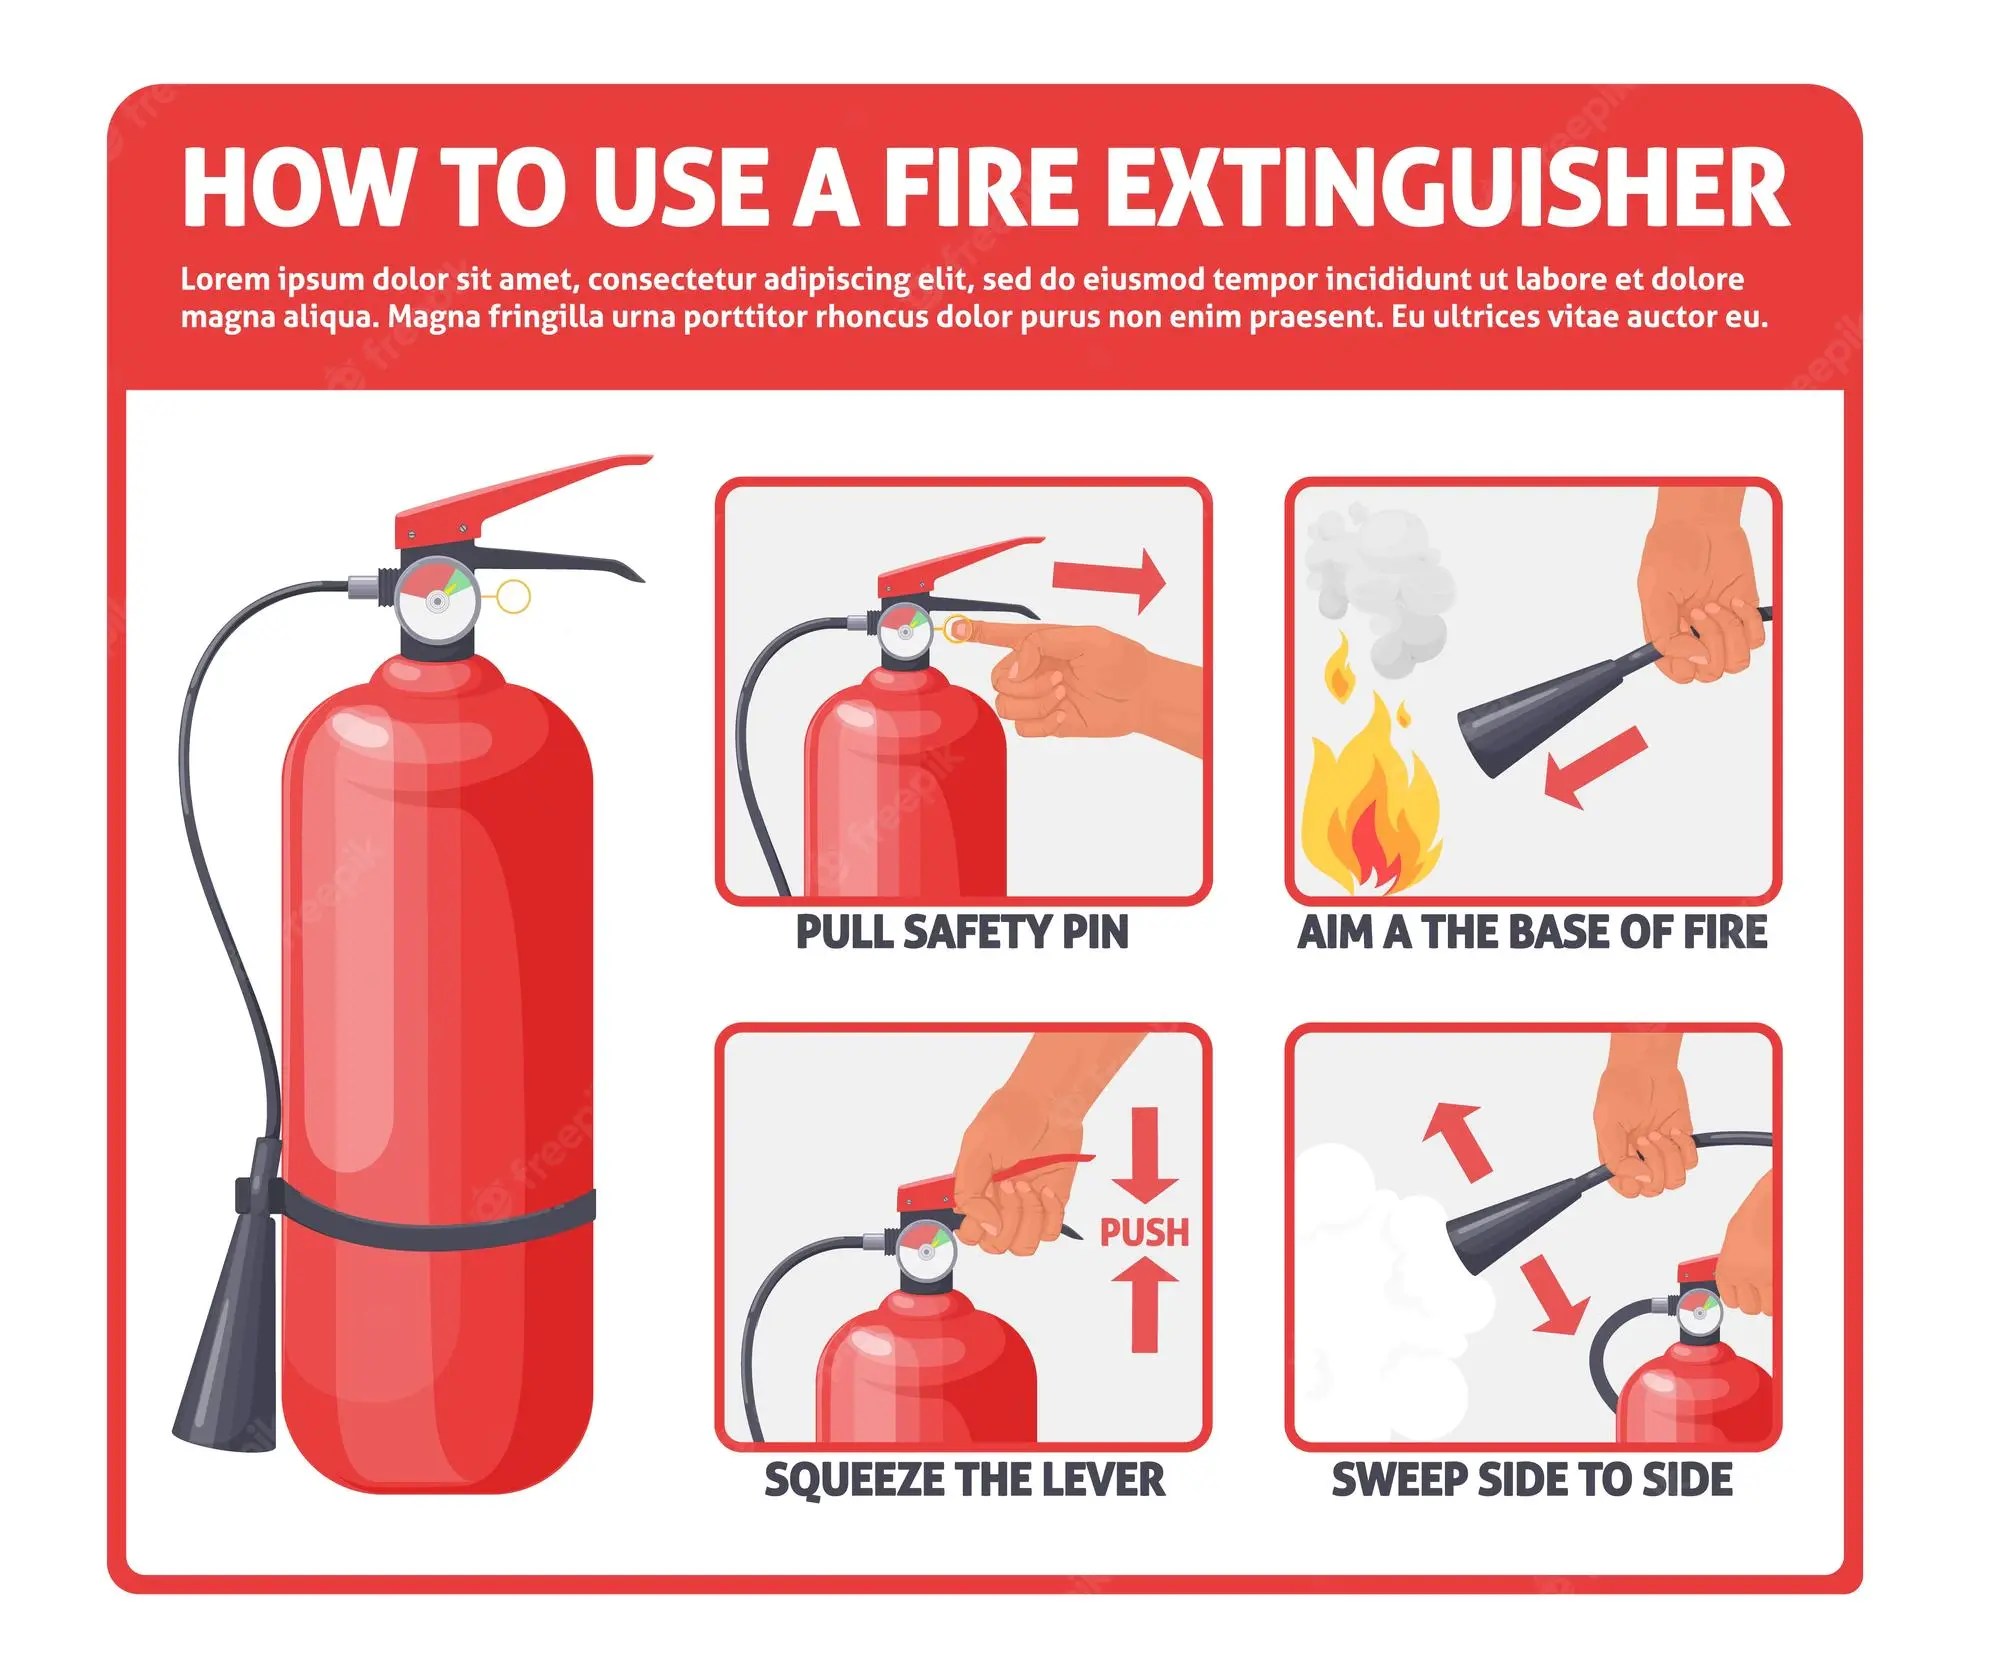 A graphic showing how to use a fire extinguisher